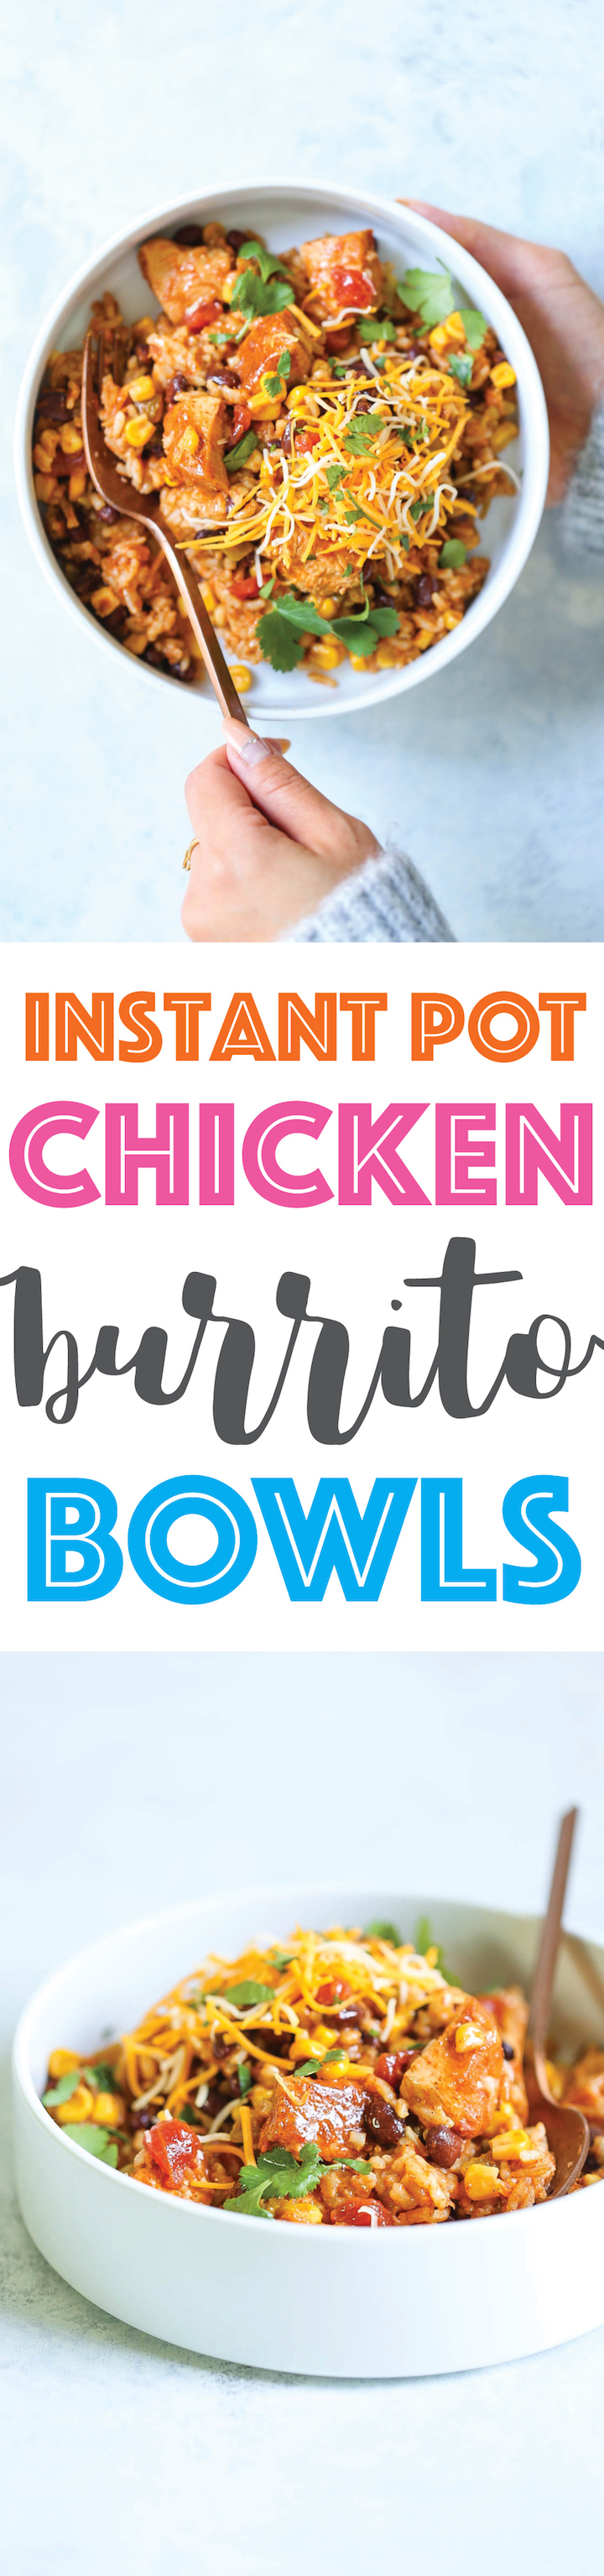 Instant Pot 20 Minute Chicken Burrito Bowls - This literally comes together in less than 10 min prep and another 10 min in the pressure cooker. The chicken is so tender and the flavors are just unbelievable here! After this, you’ll never want to make burrito bowls without your Instant Pot! 